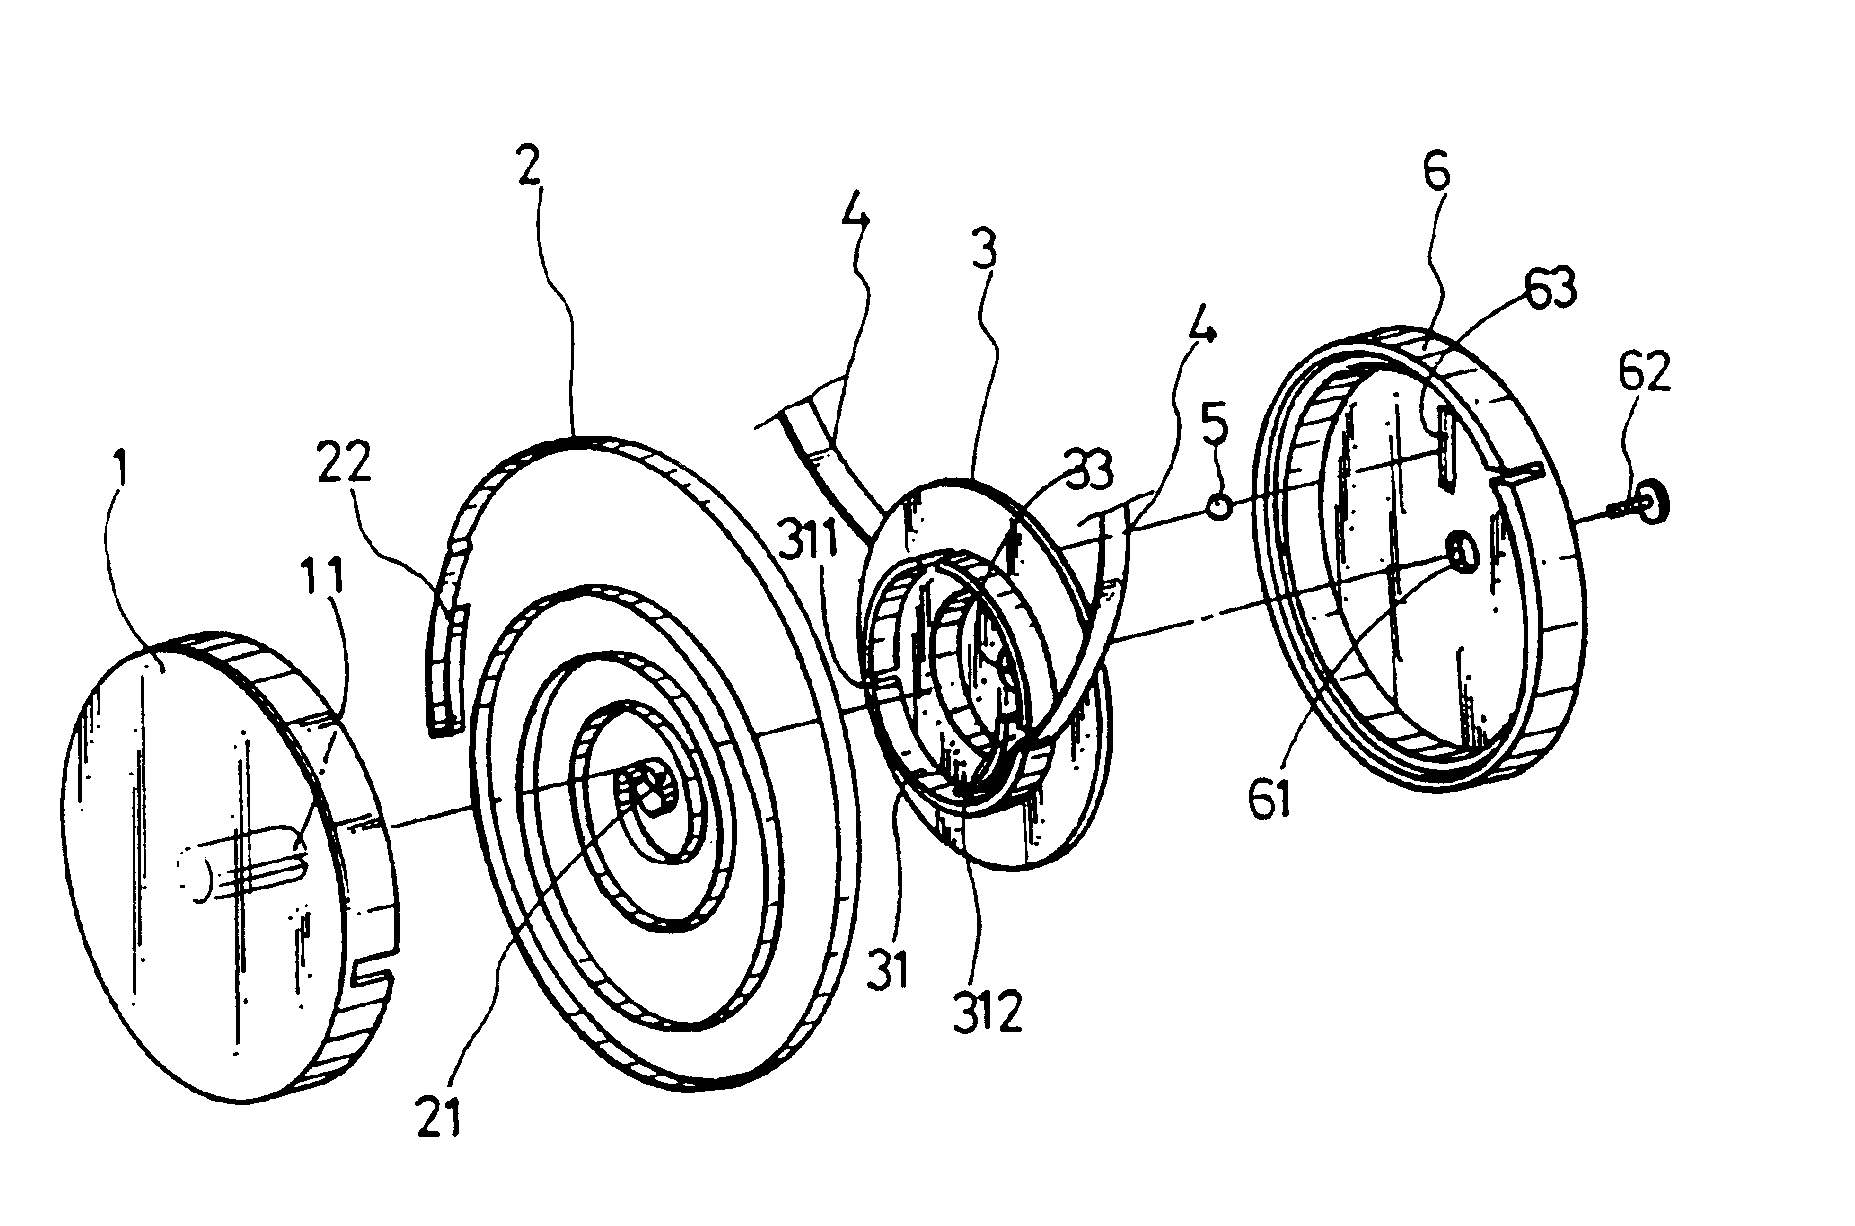 Multi-stages retractable coiling cord device